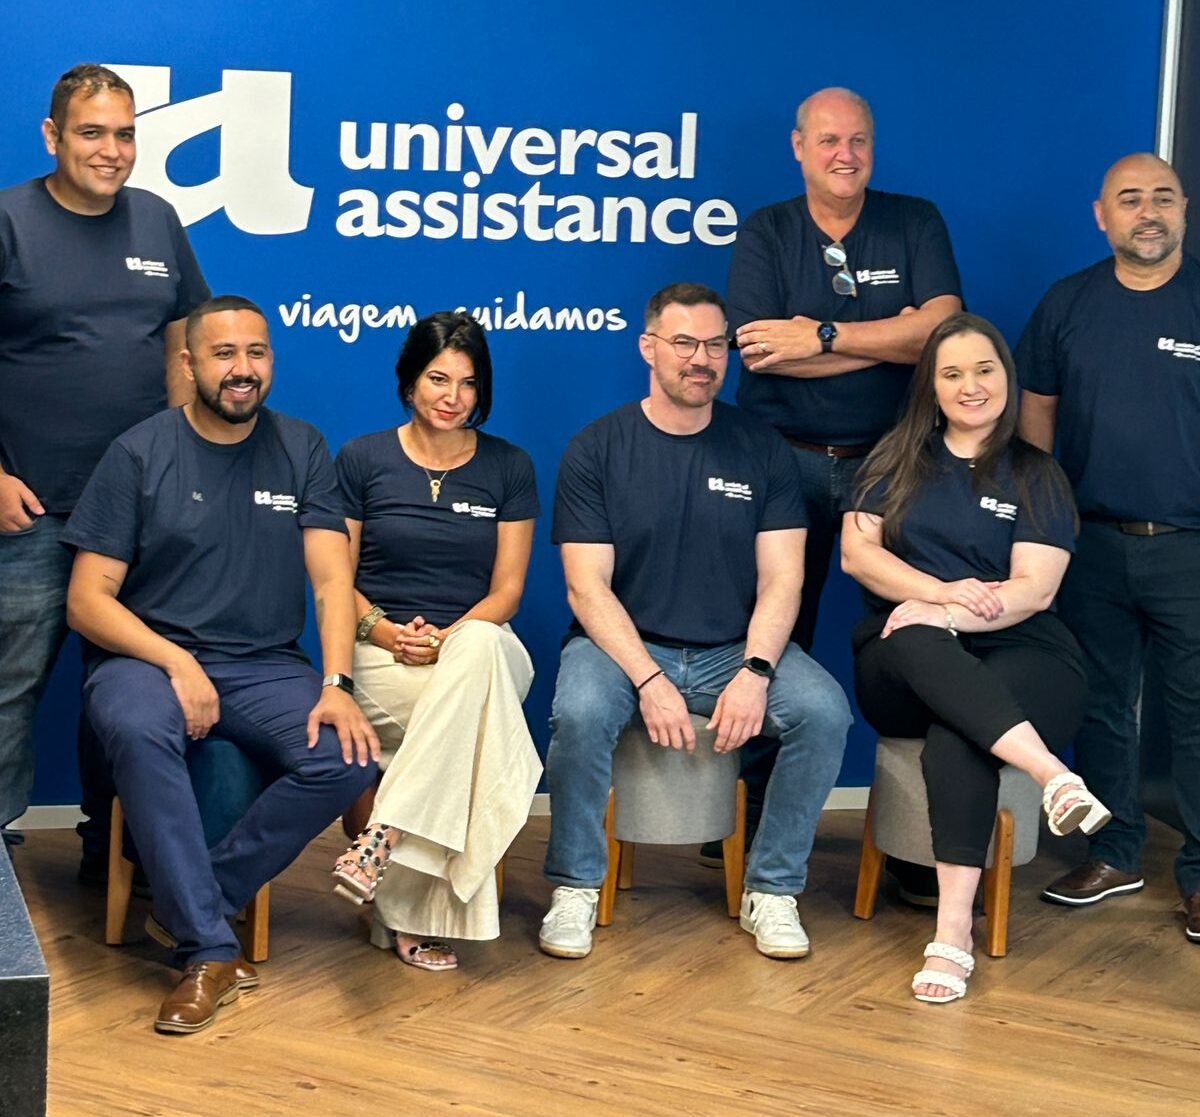 Equipe Universal Assistance